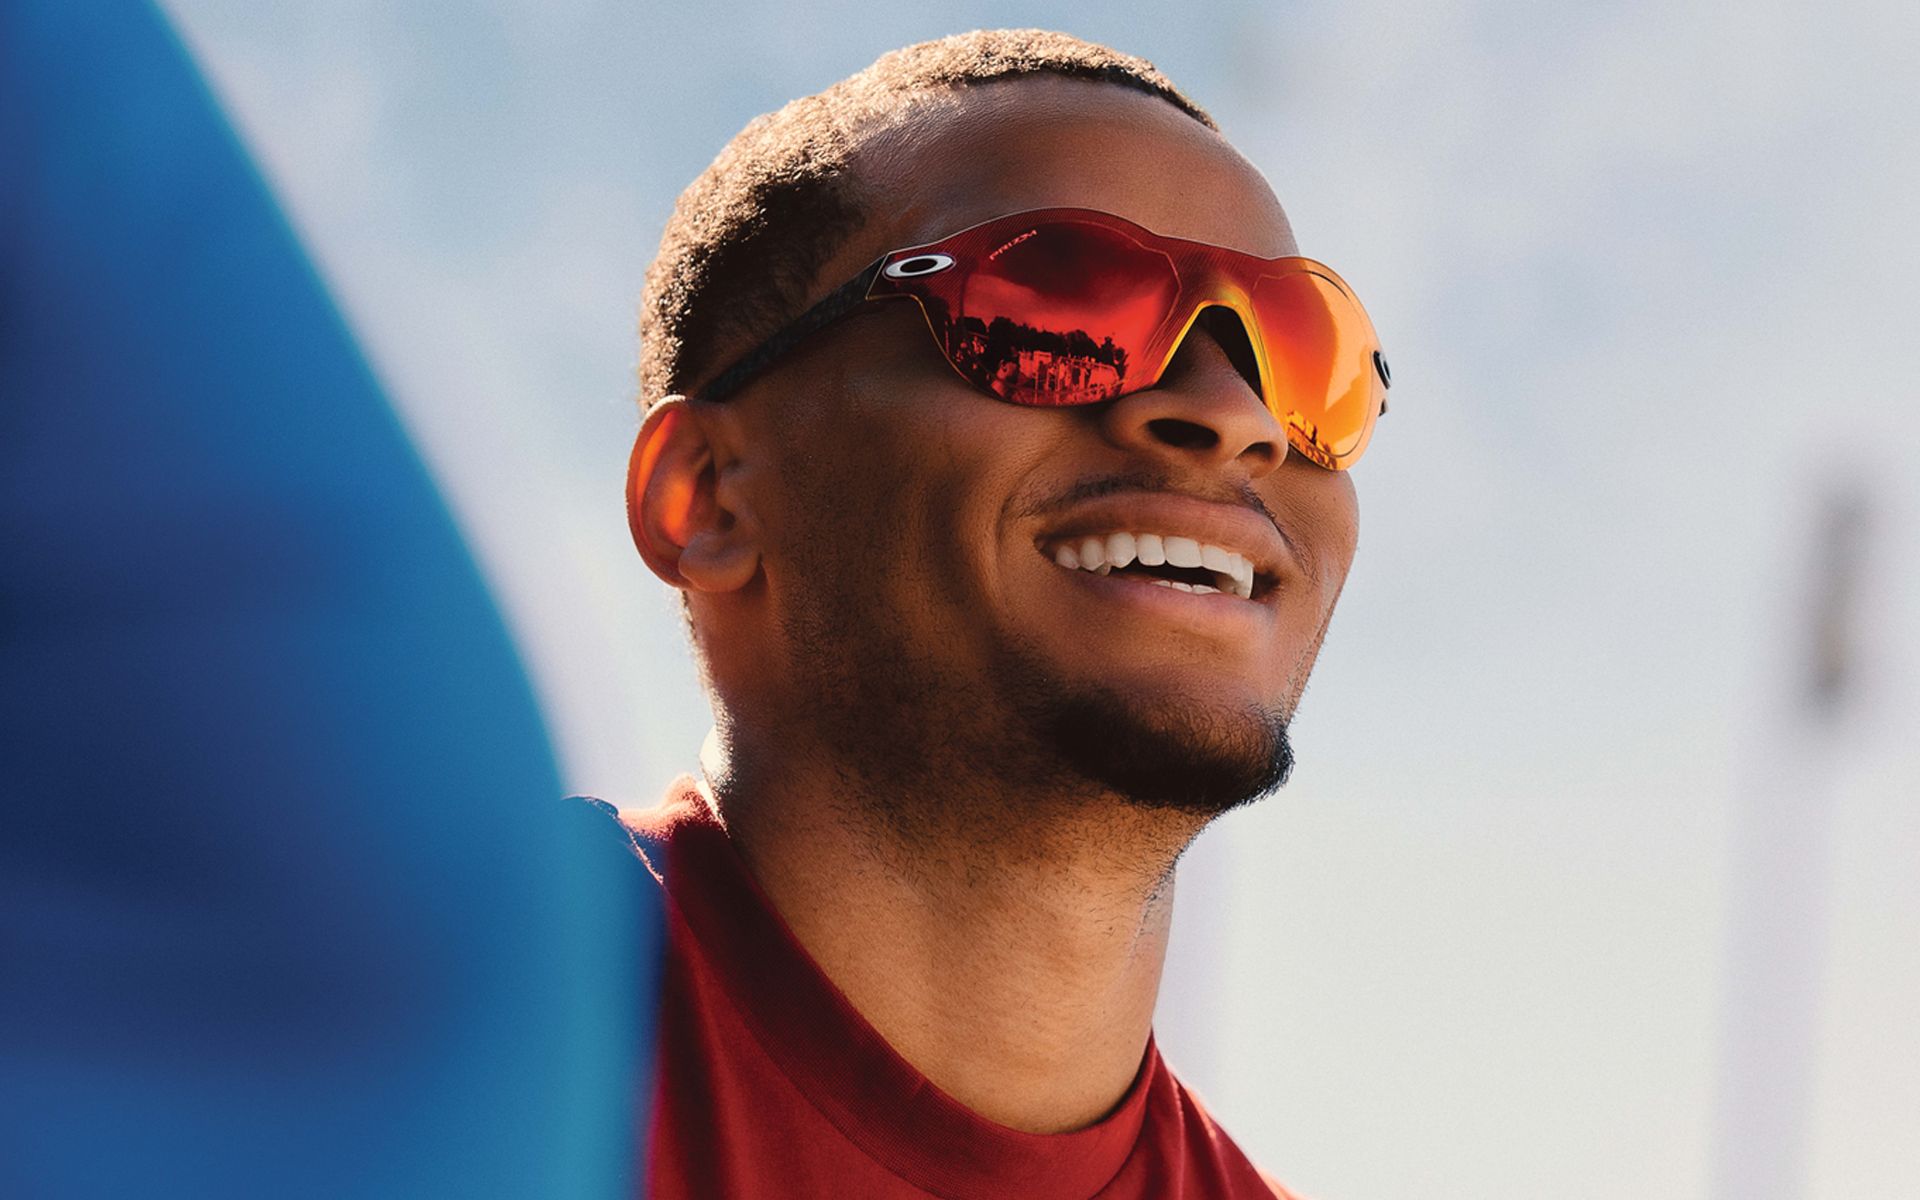 Oakley Re:SubZero: Designed With Lightweight Frame, Made To Wear During  Runs 